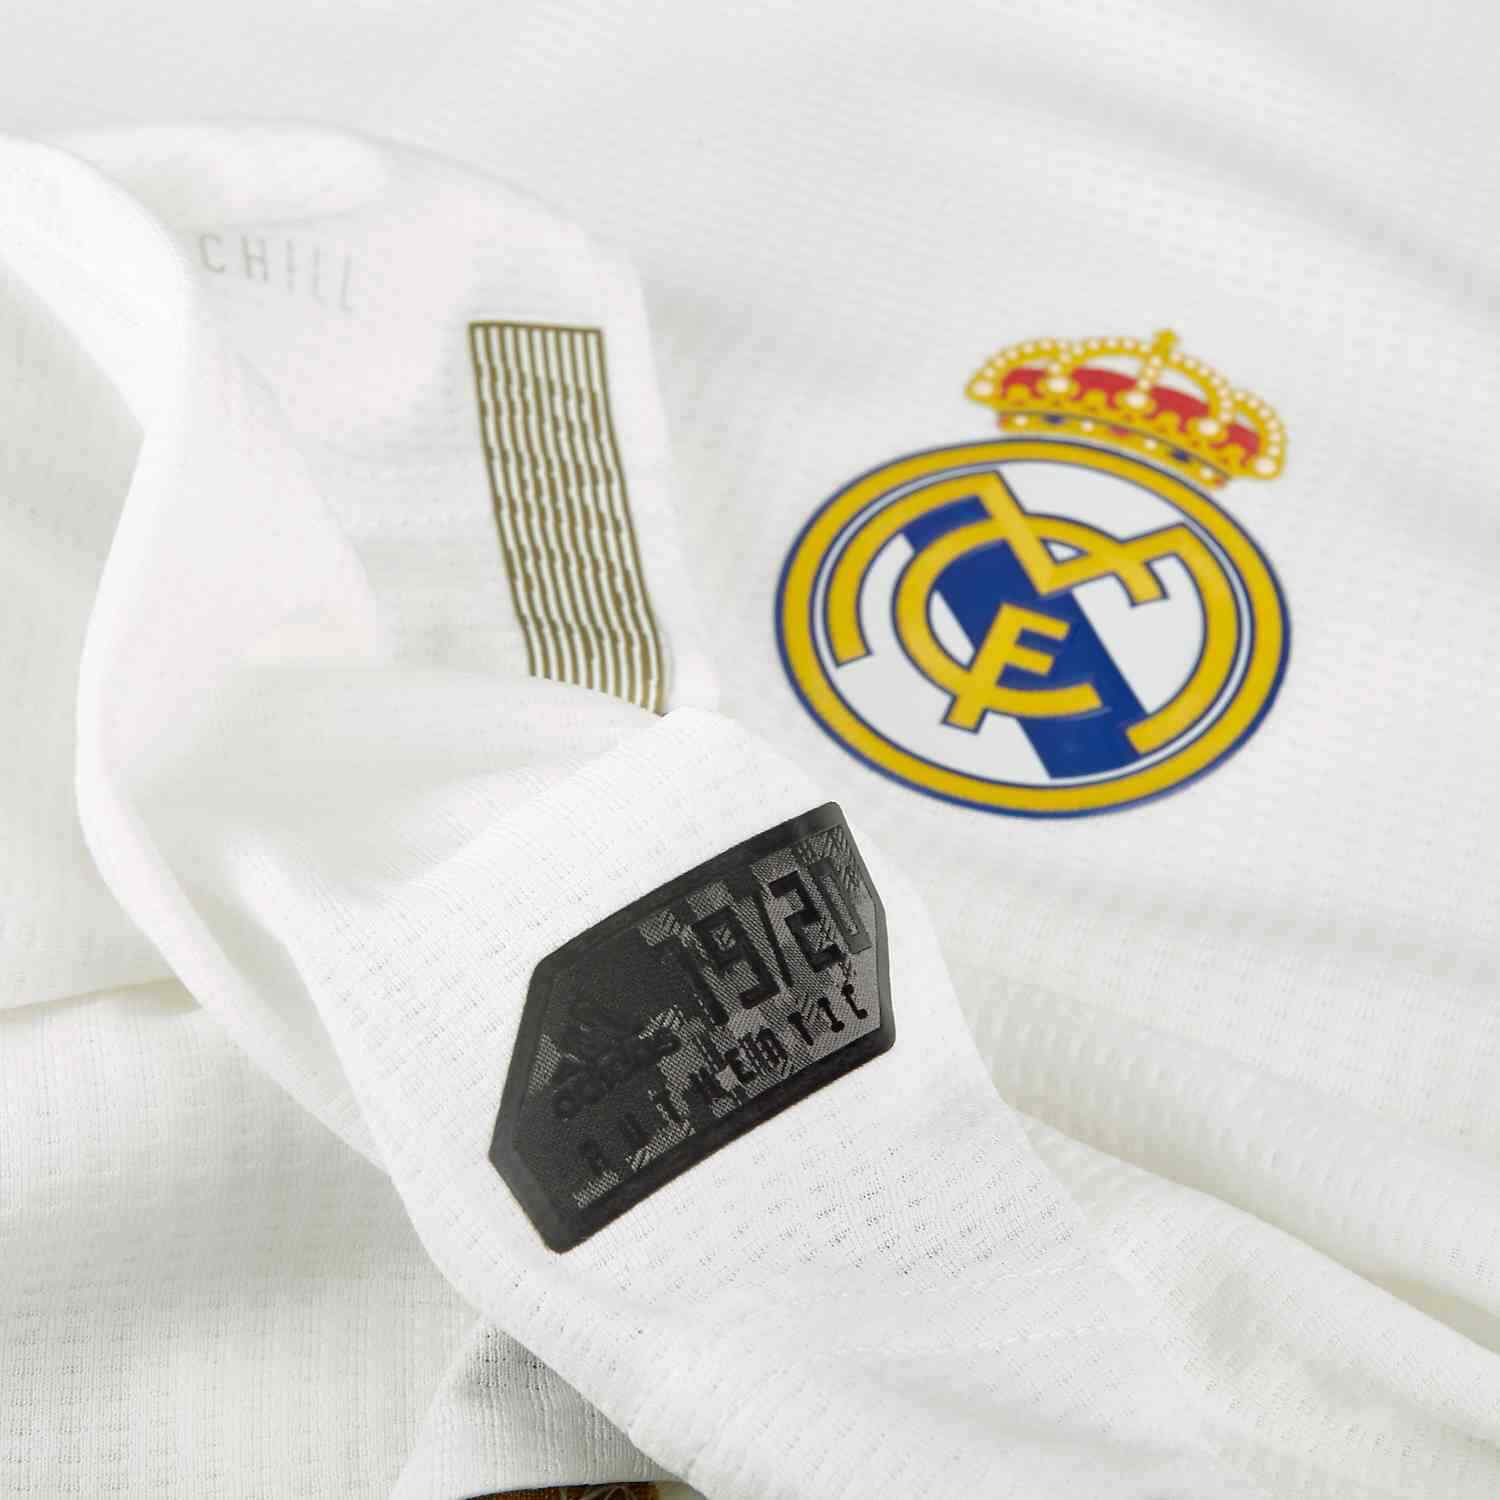 Adidas Real Madrid Official Home Authentic soccer Jersey 2019/20